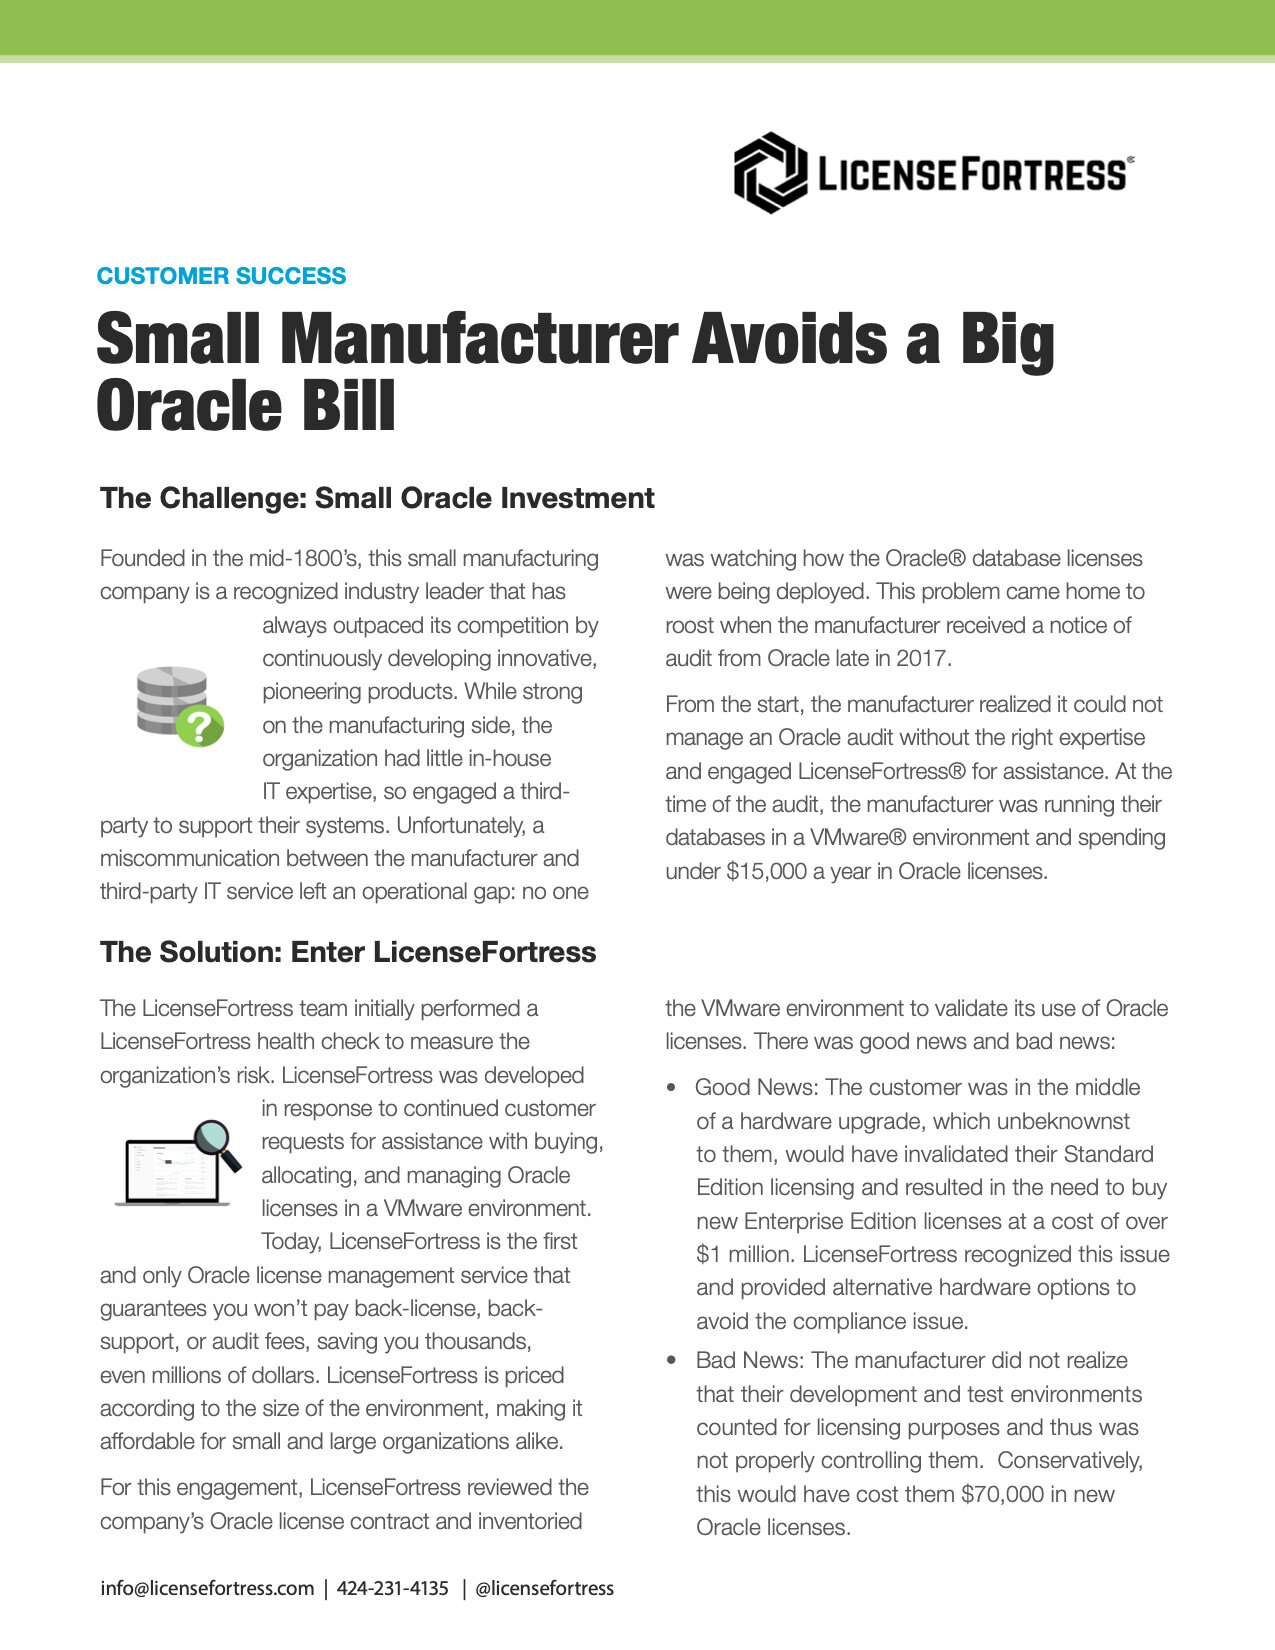 Small Manufacturer Avoids a Big Oracle Bill 